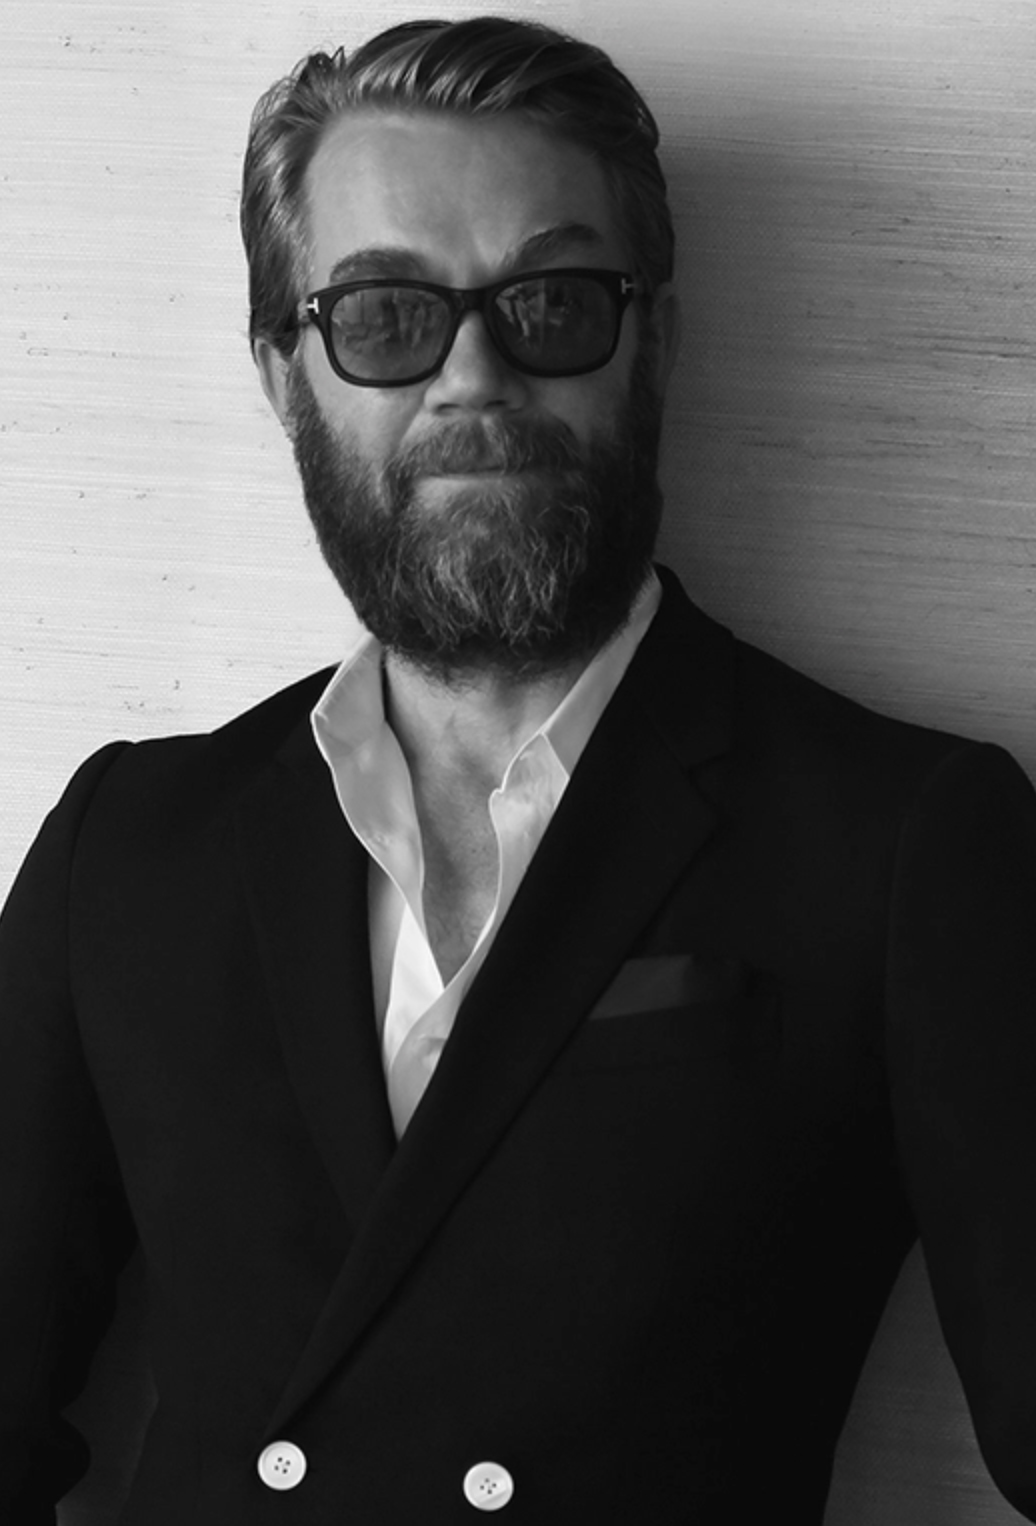 A man with beard and glasses in suit